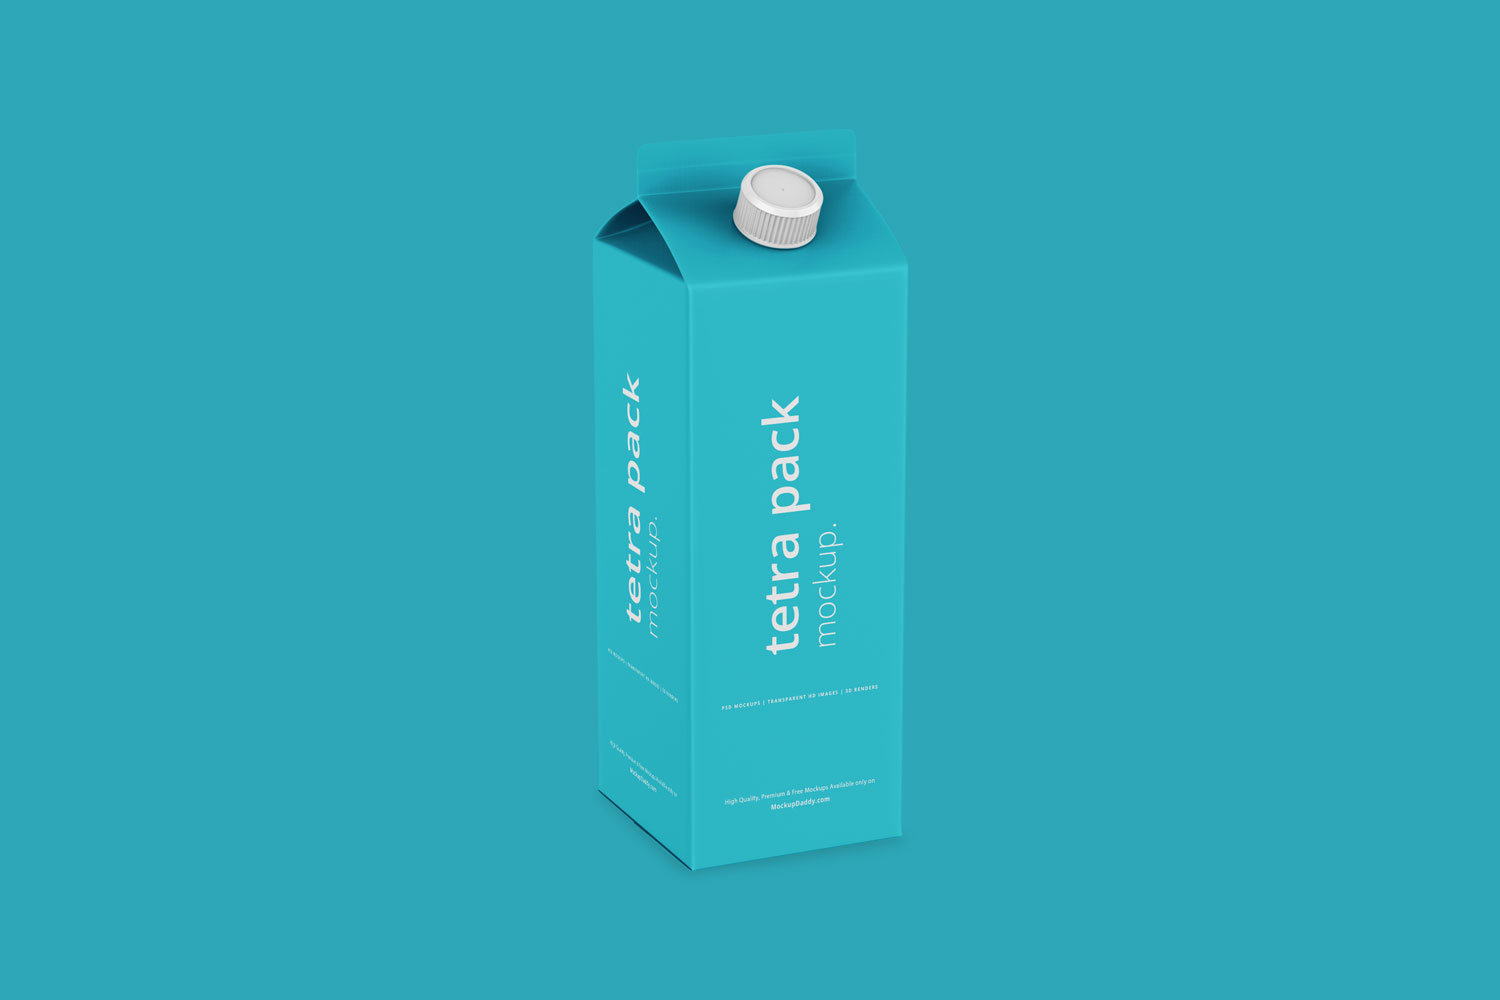 Blue Tetra Pack Mockup with white cap on a blue background.